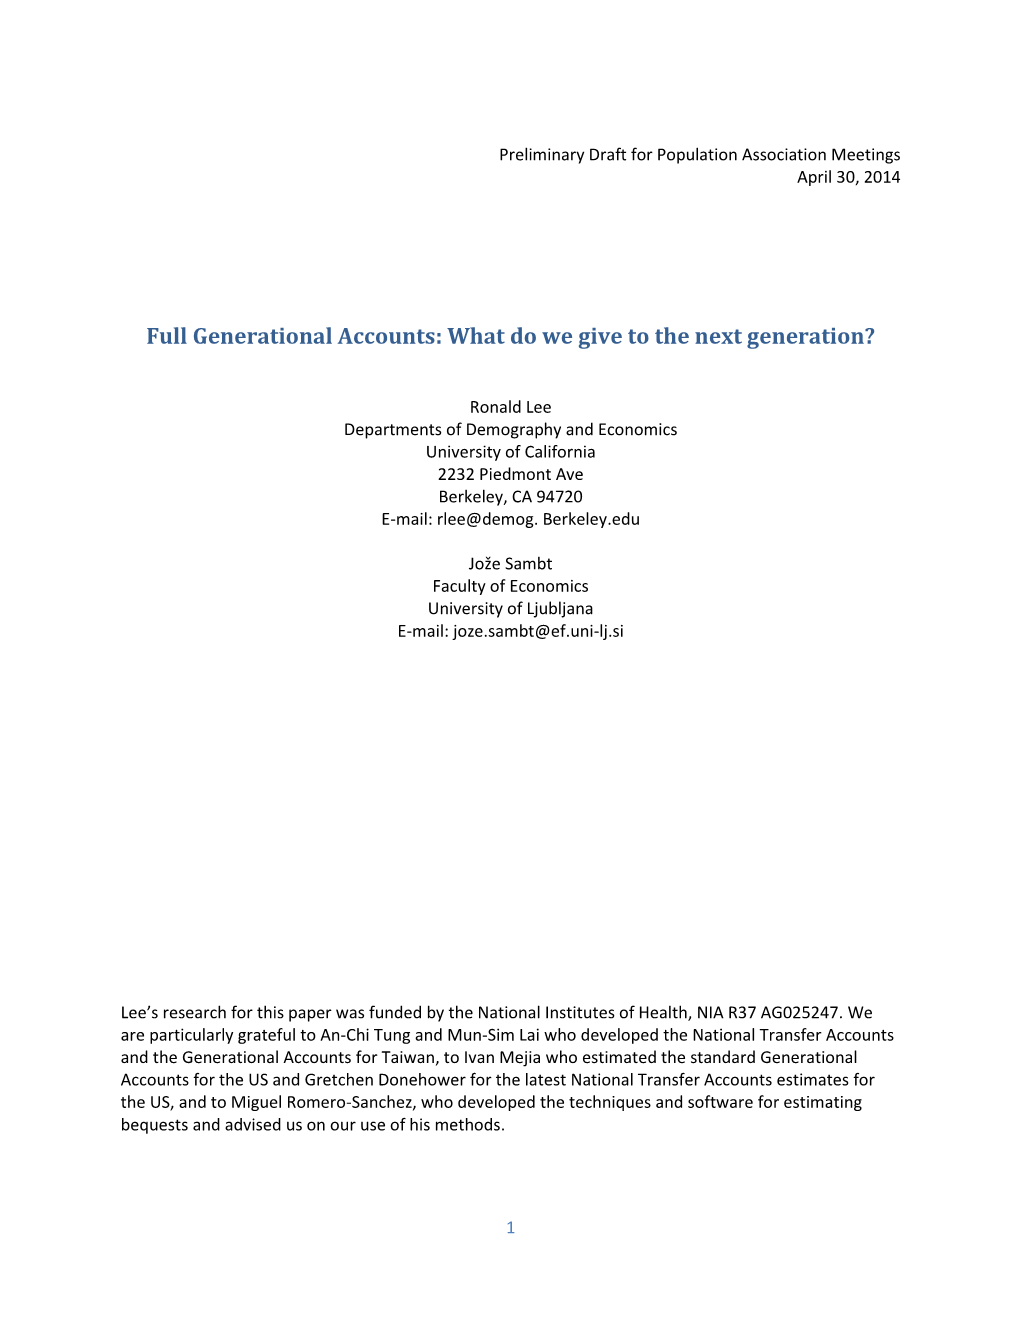 Full Generational Accounts: What Do We Give to the Next Generation?